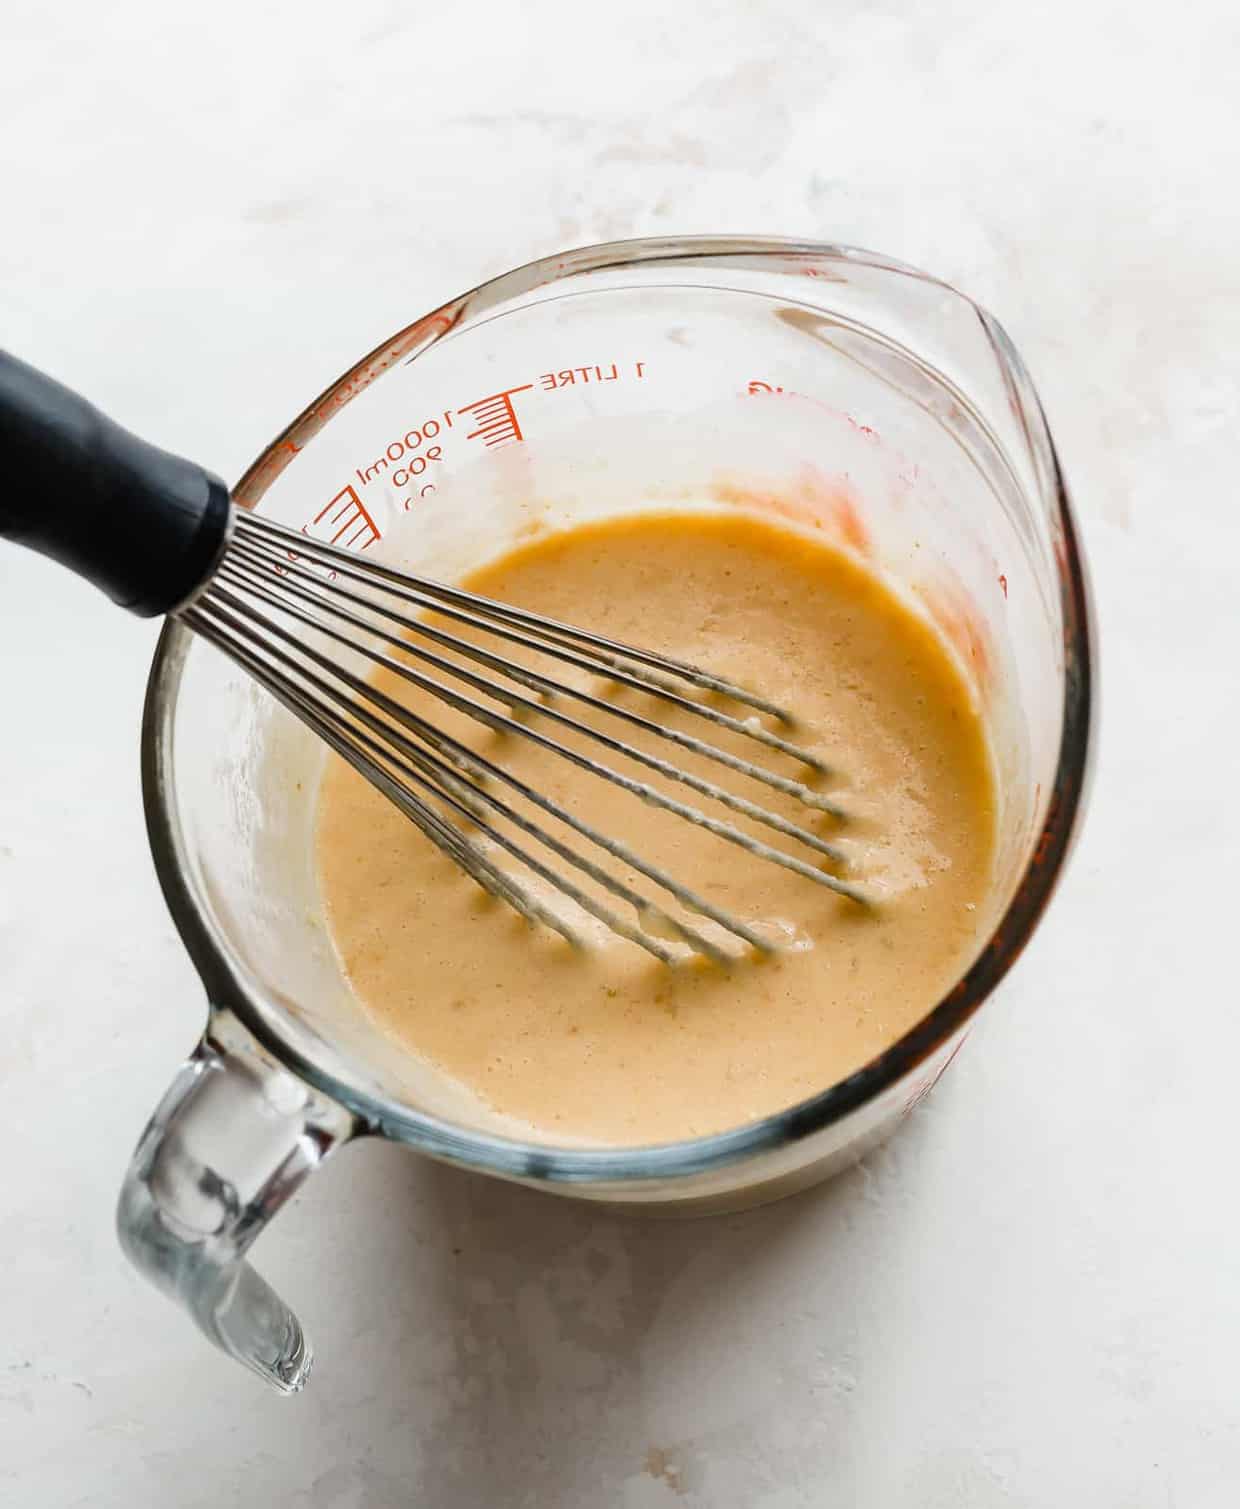 A glass measuring cup full of pumpkin puree, buttermilk, egg yolks, and butter.